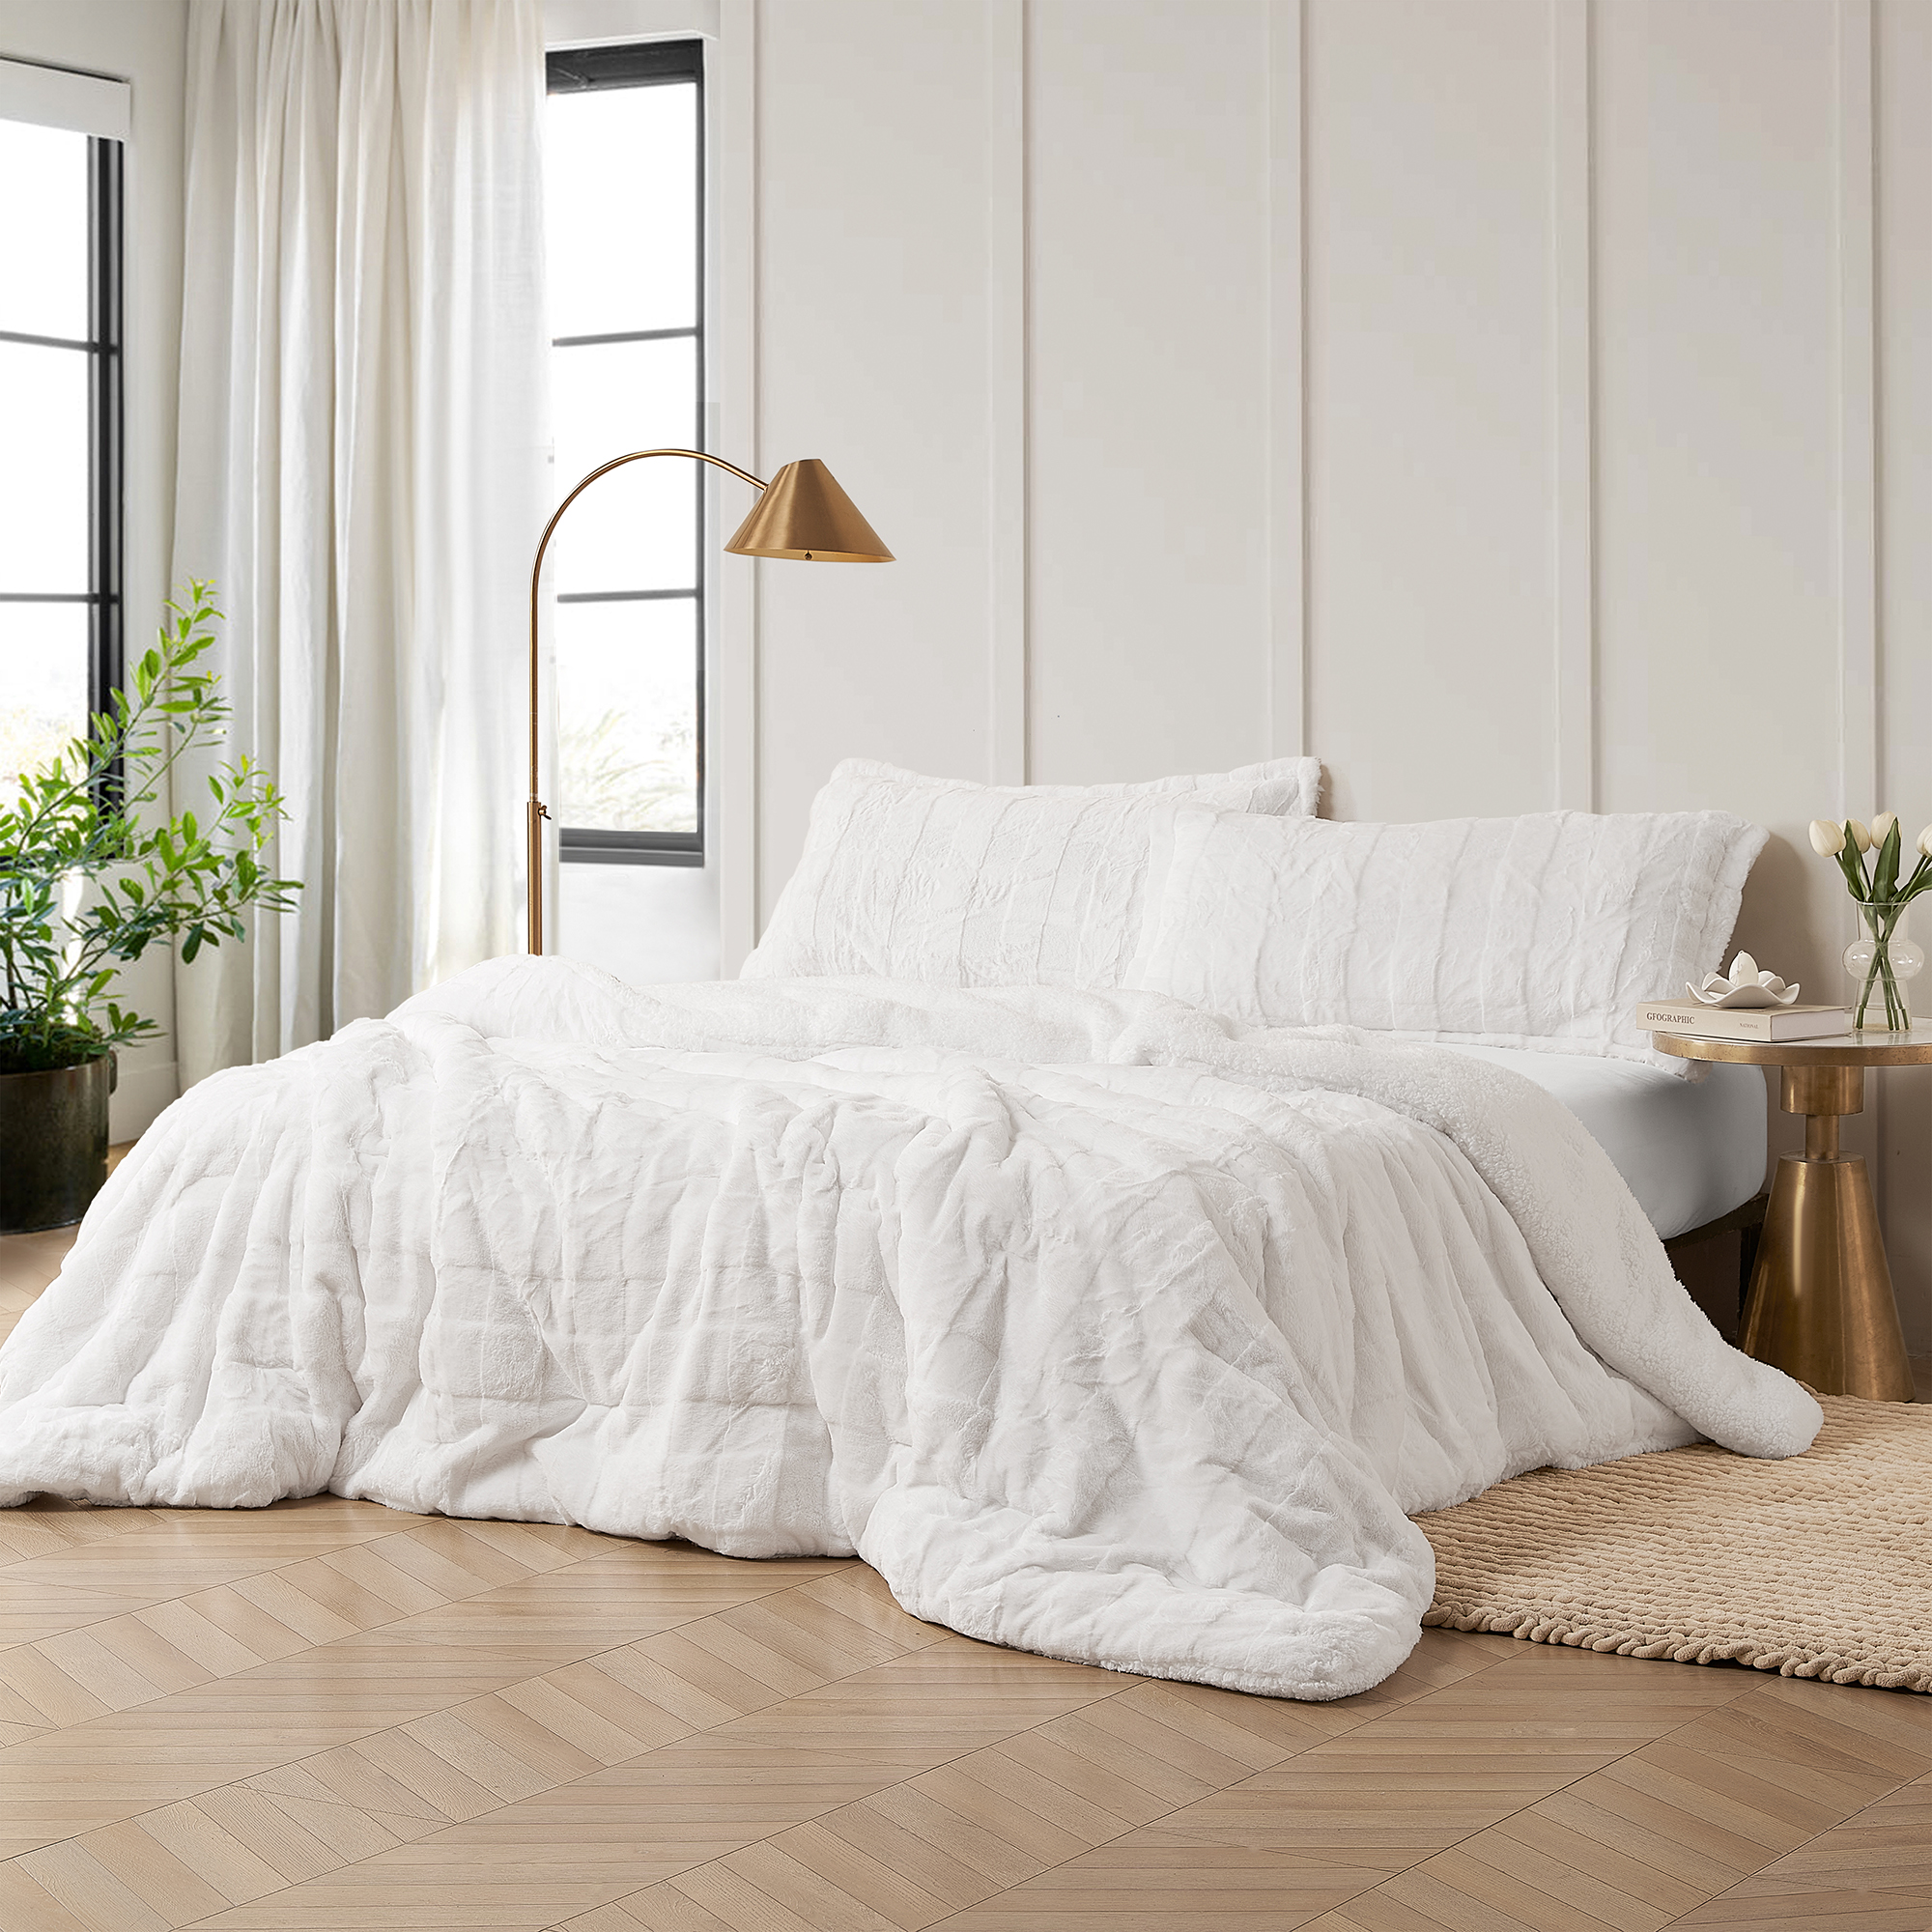 Cut n Sew Chunky Bunny - Coma Inducer Oversized King Comforter - White